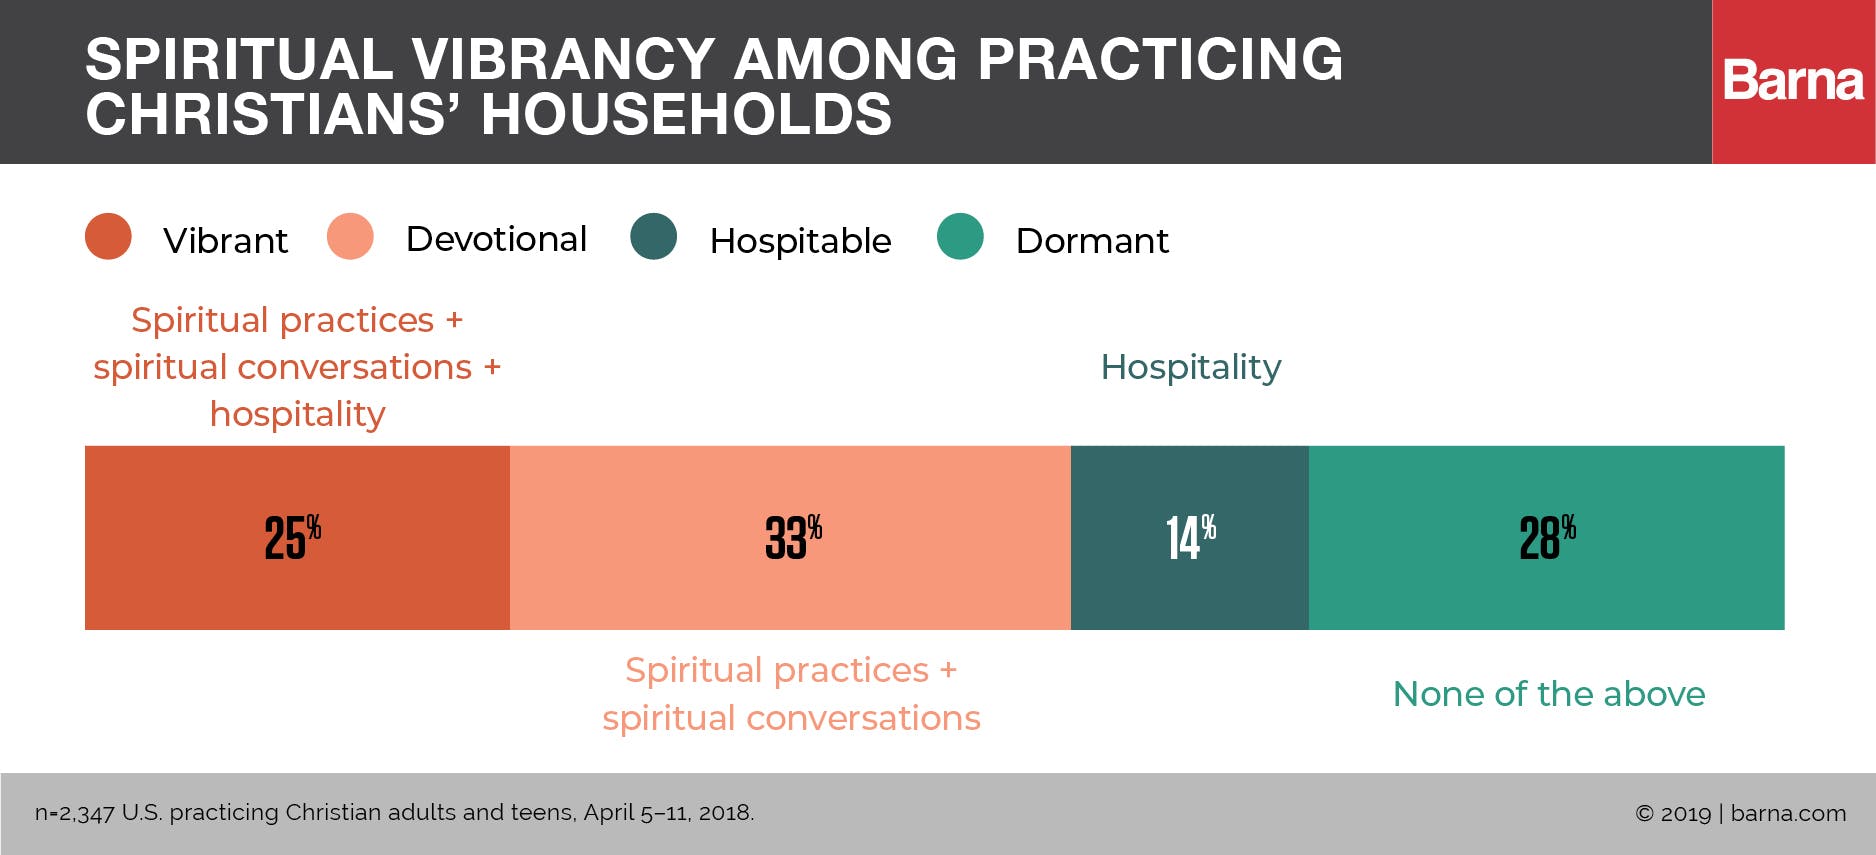 What Makes for a Spiritually Vibrant Household?